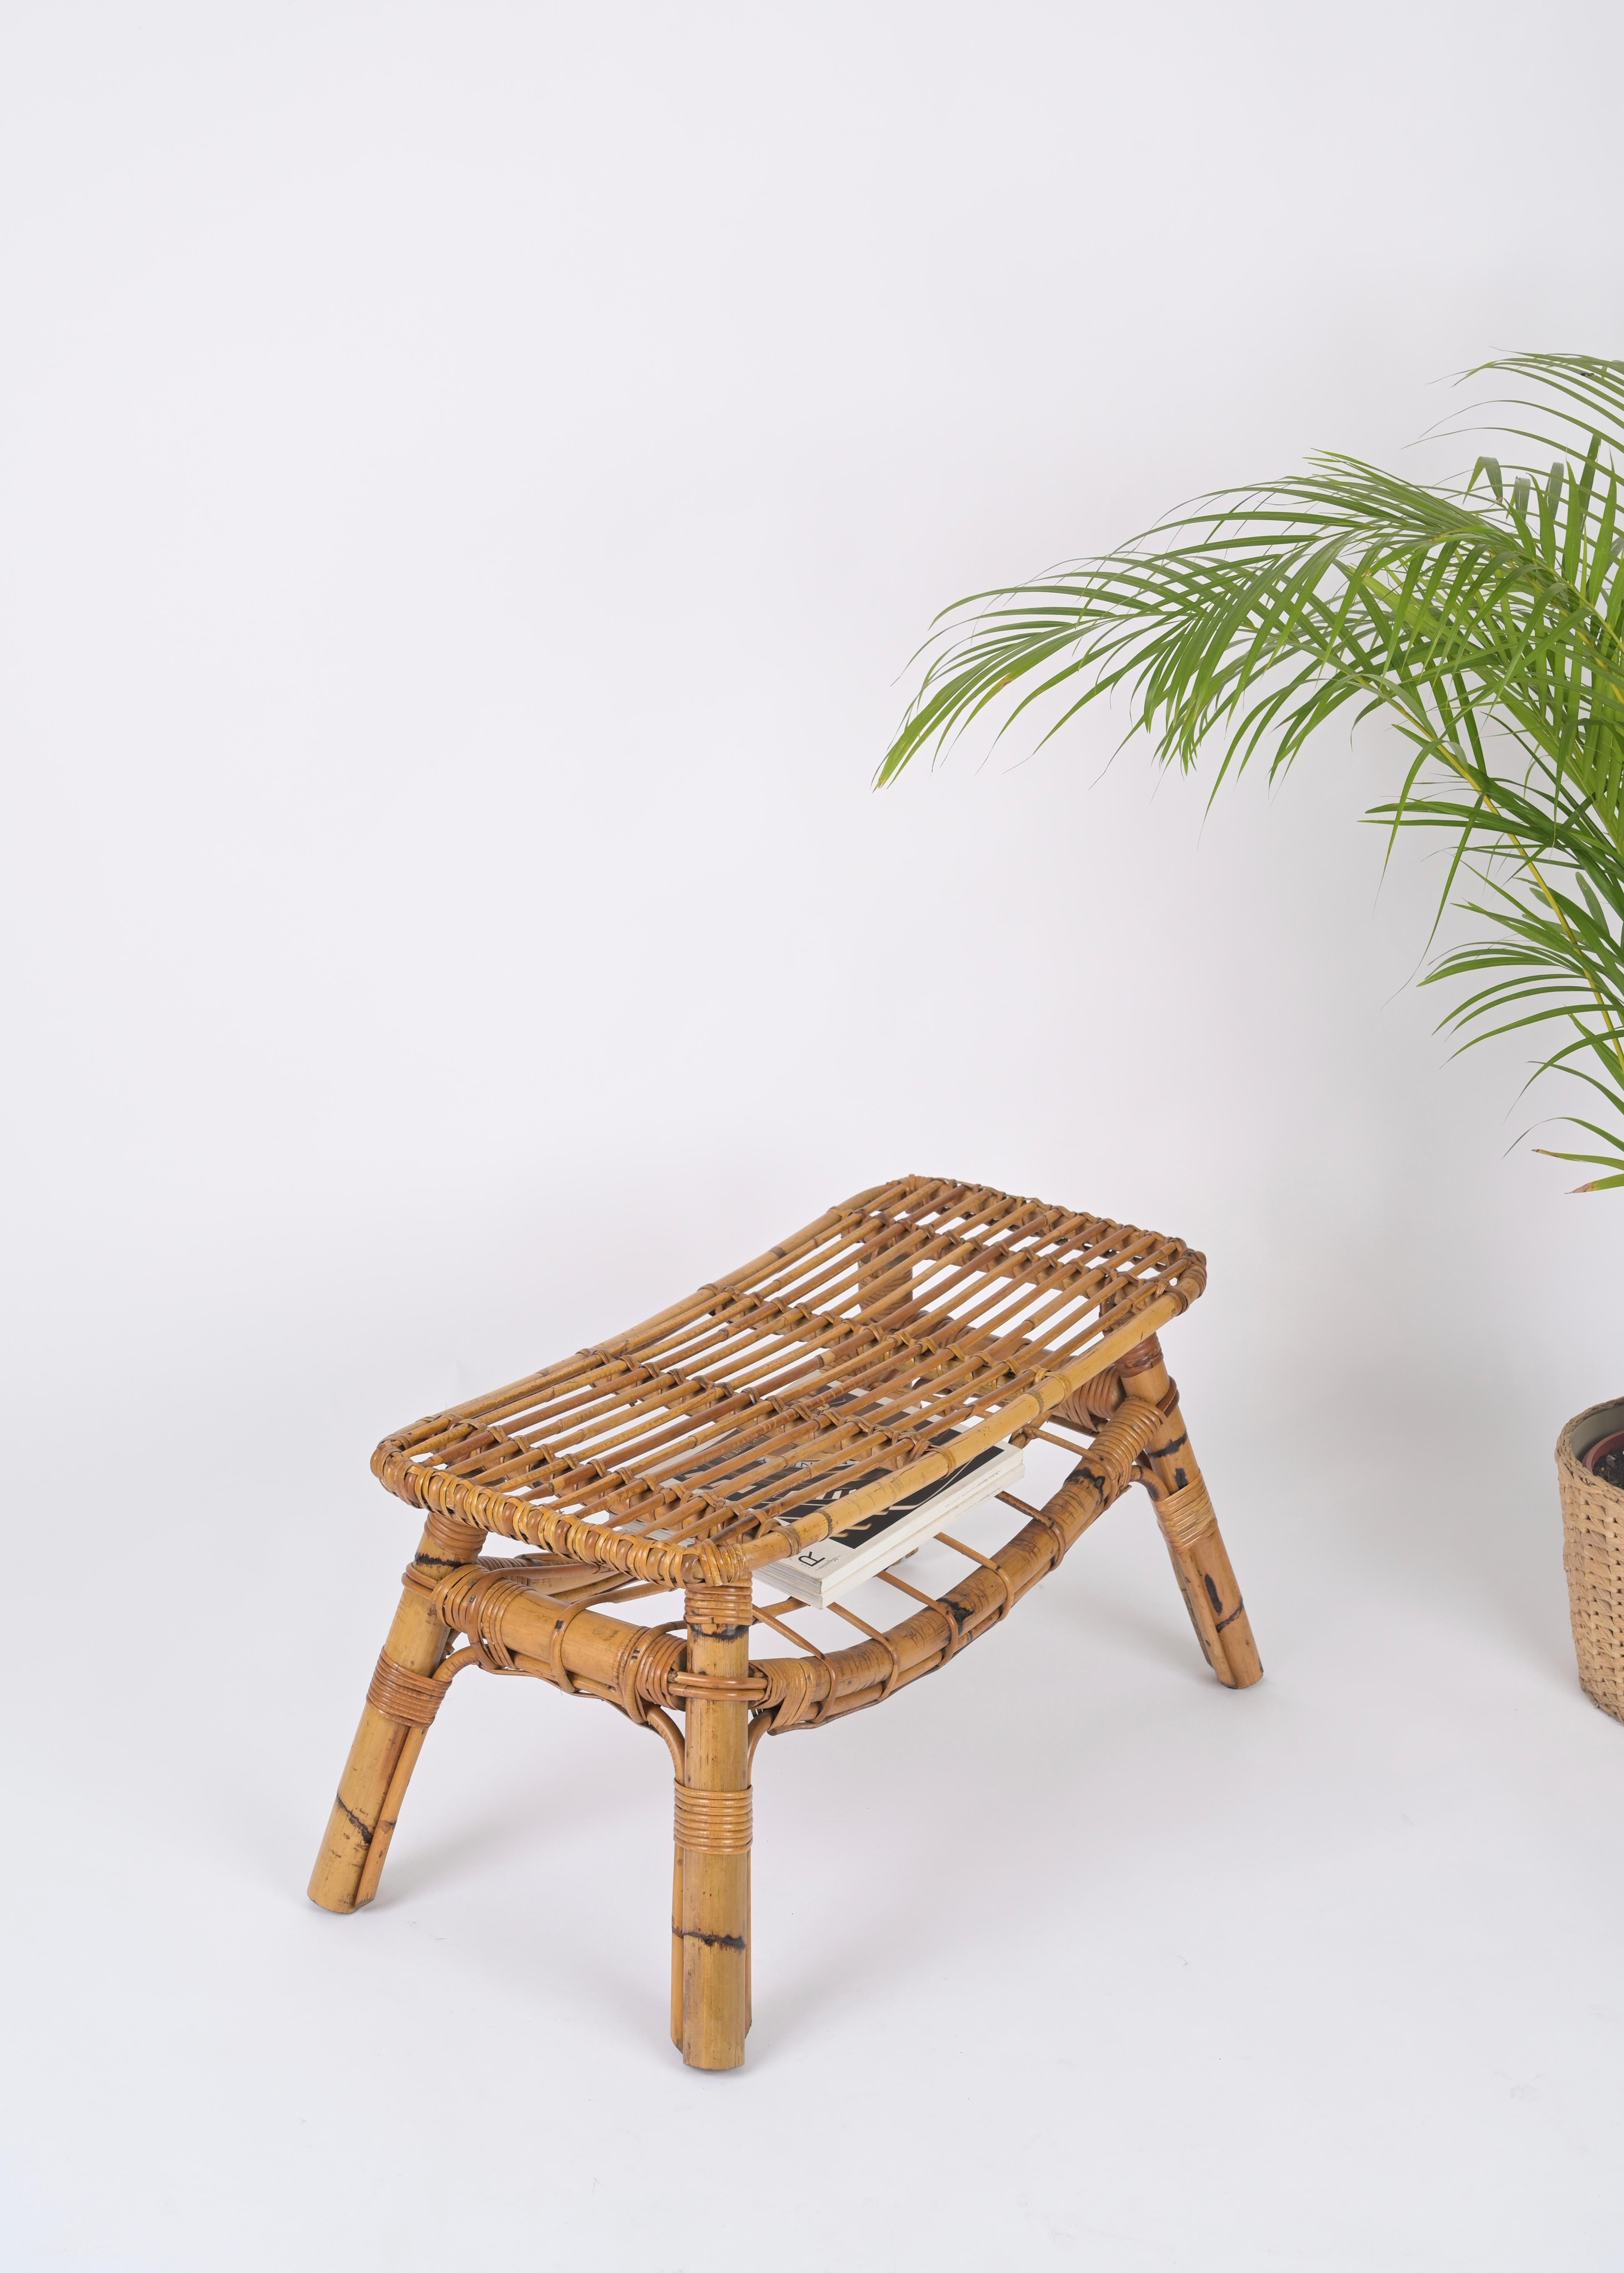 Italian Coffee Table or Bench in Rattan and Wicker by Tito Agnoli, 1960s For Sale 7